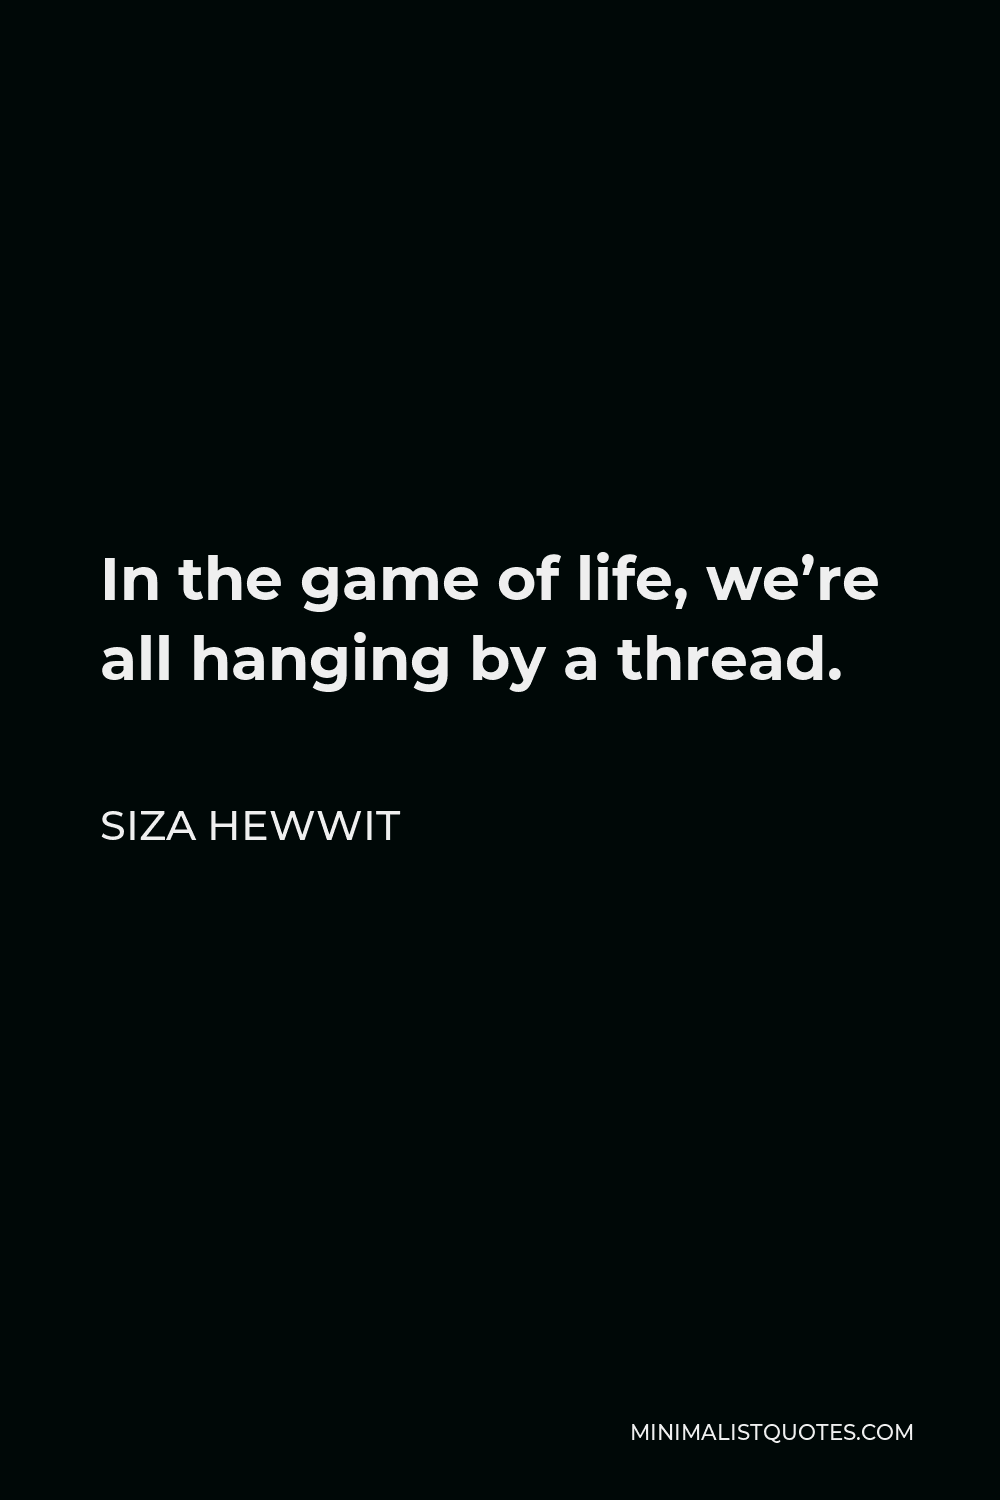 Siza Hewwit Quote - In the game of life, we’re all hanging by a thread.